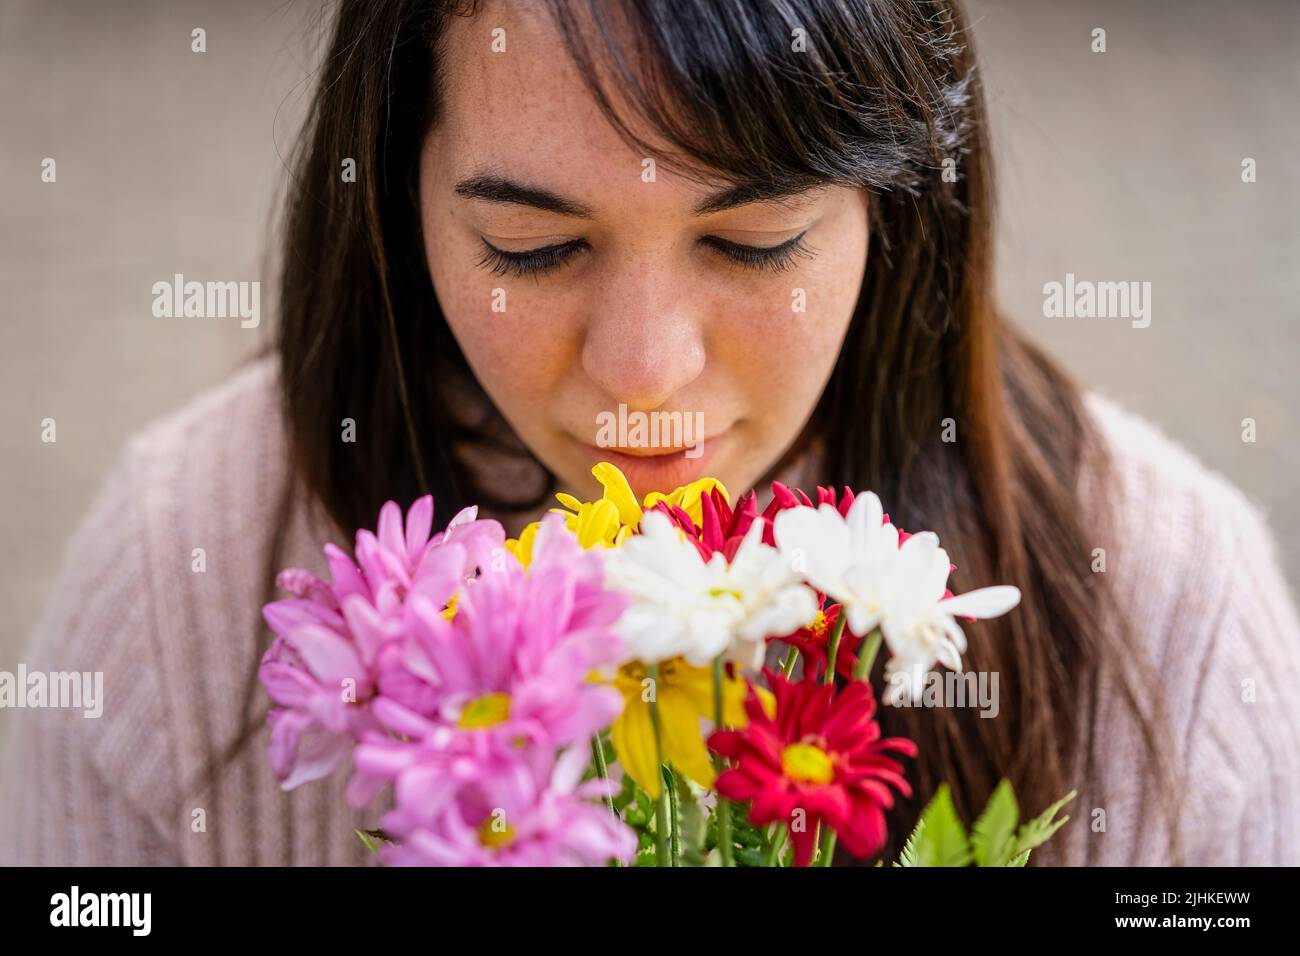 Close-up portrait of a young Latin woman holding a bouquet of flowers Stock Photo